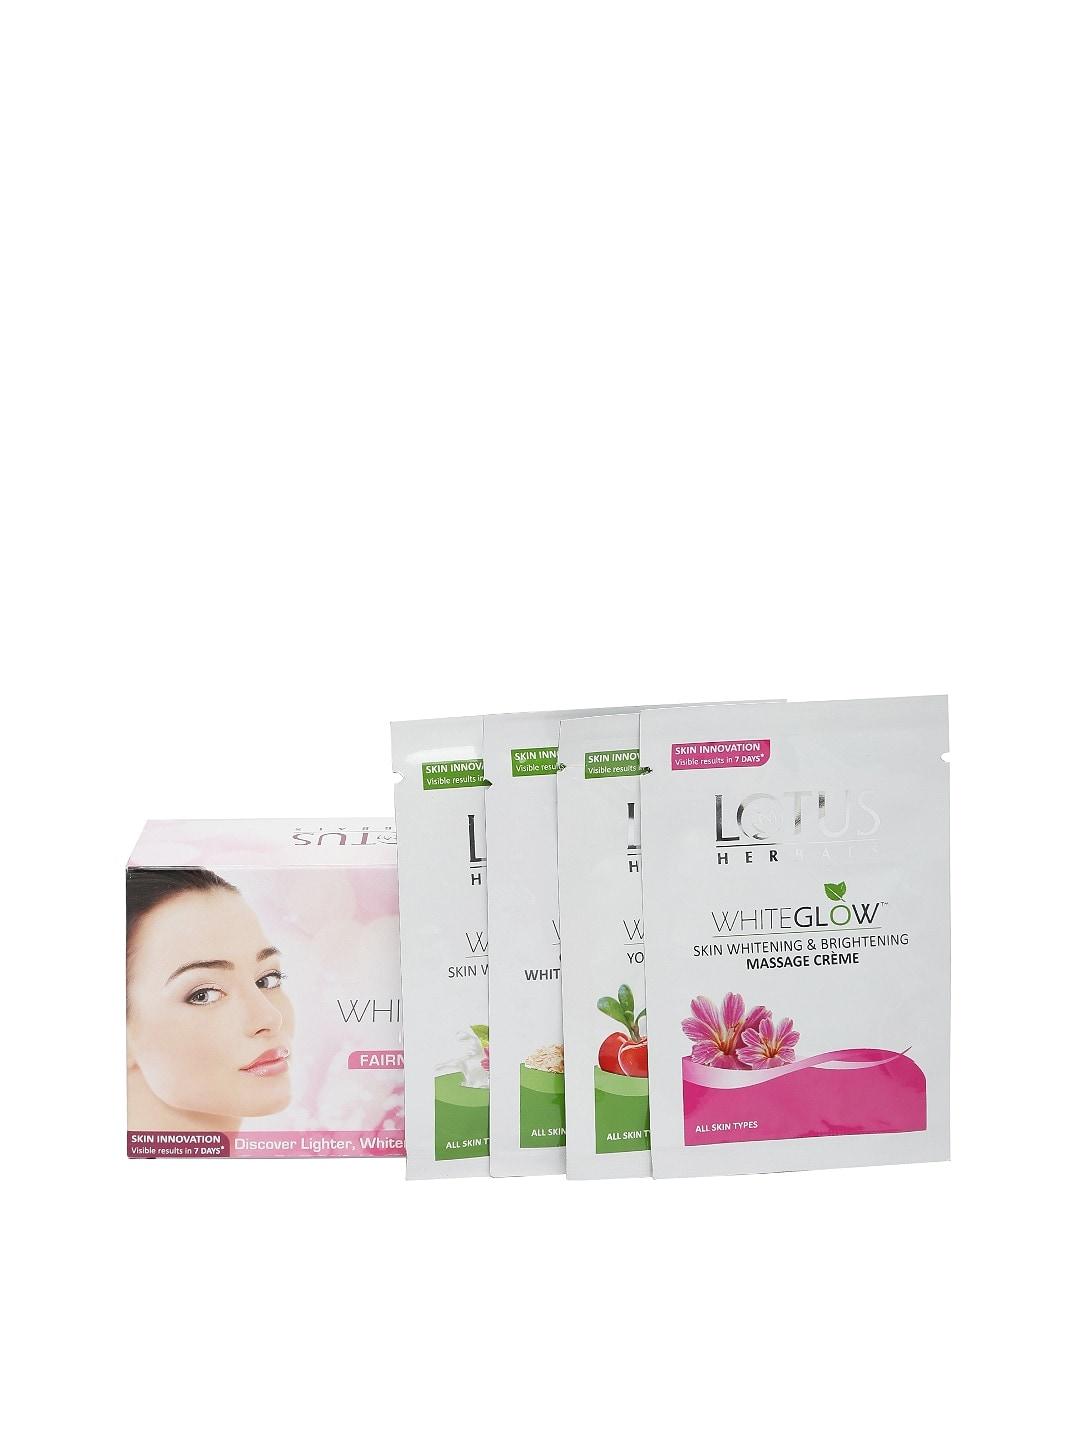 Lotus Herbals Sustainable White Glow 4 in 1 Fairness Facial Kit - Insta Glow